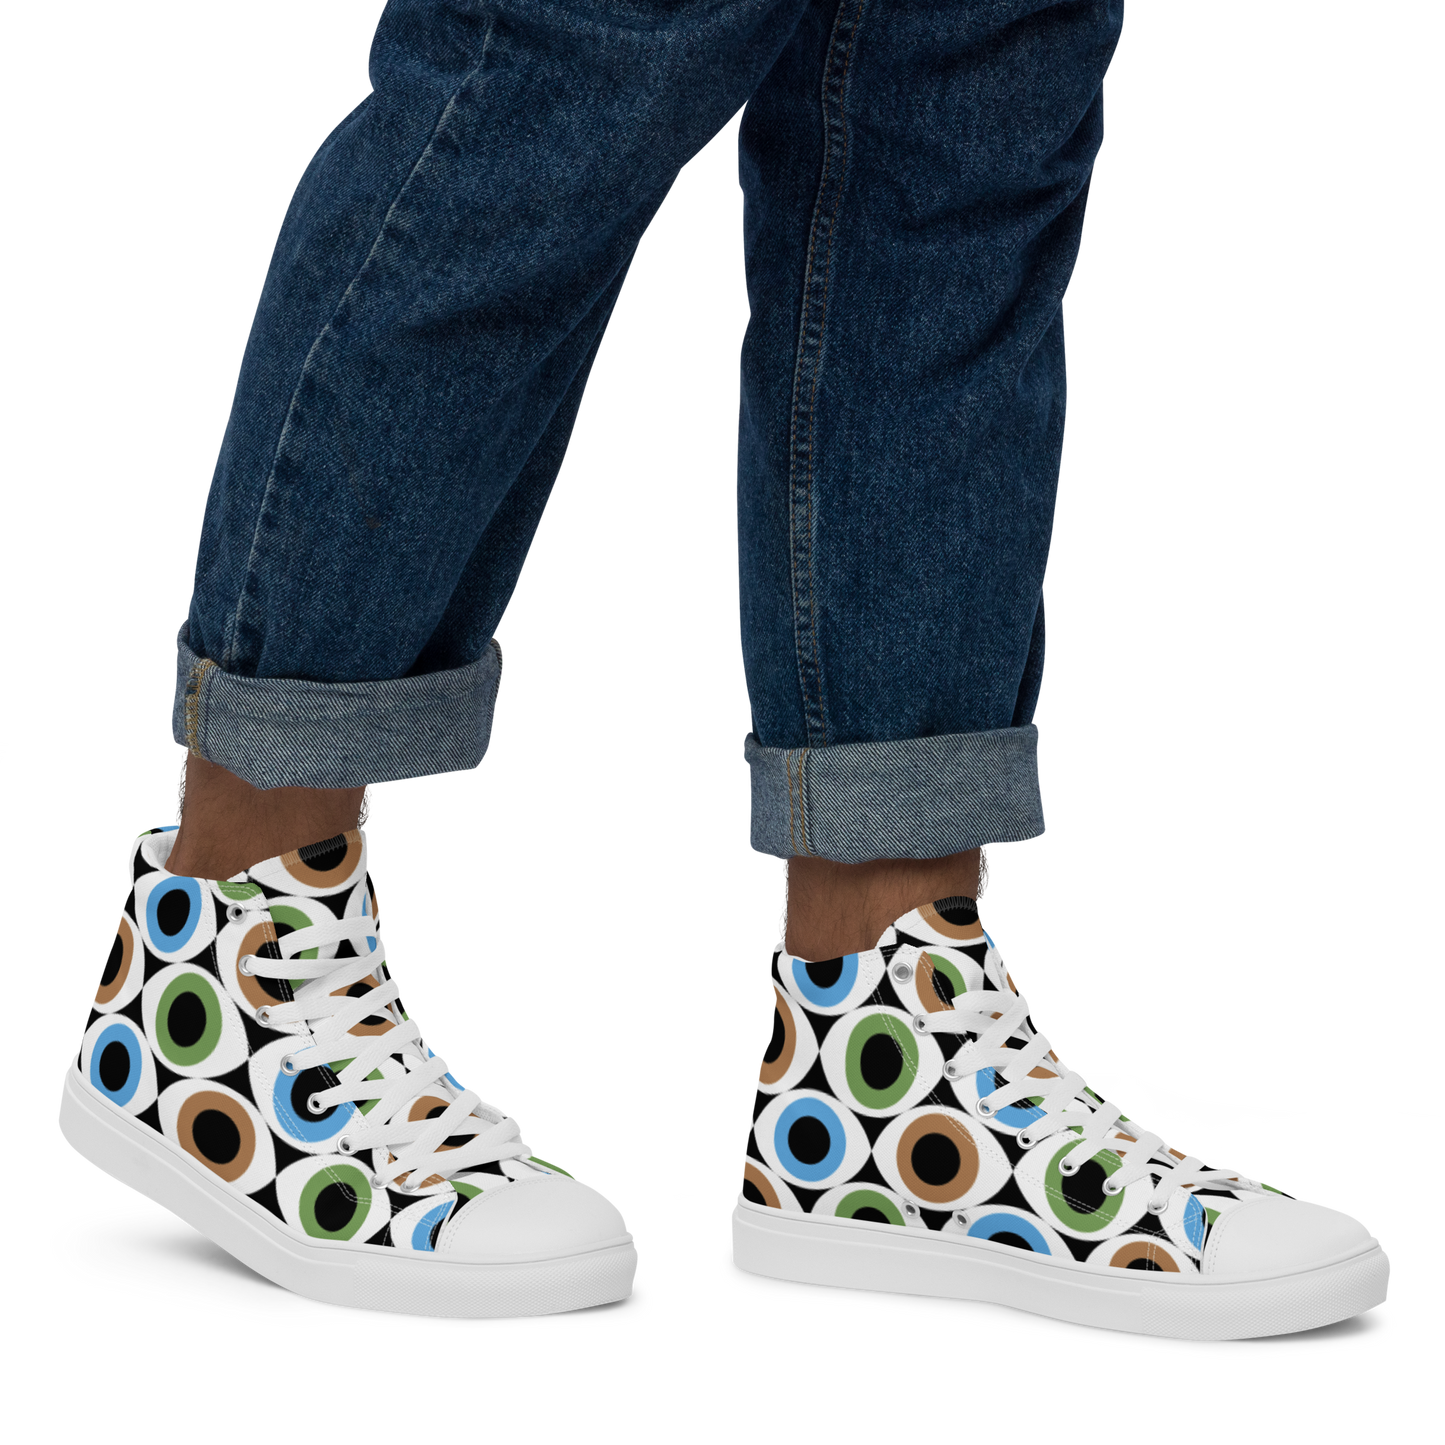 Eye See - Men’s high top canvas shoes Mens High Top Shoes